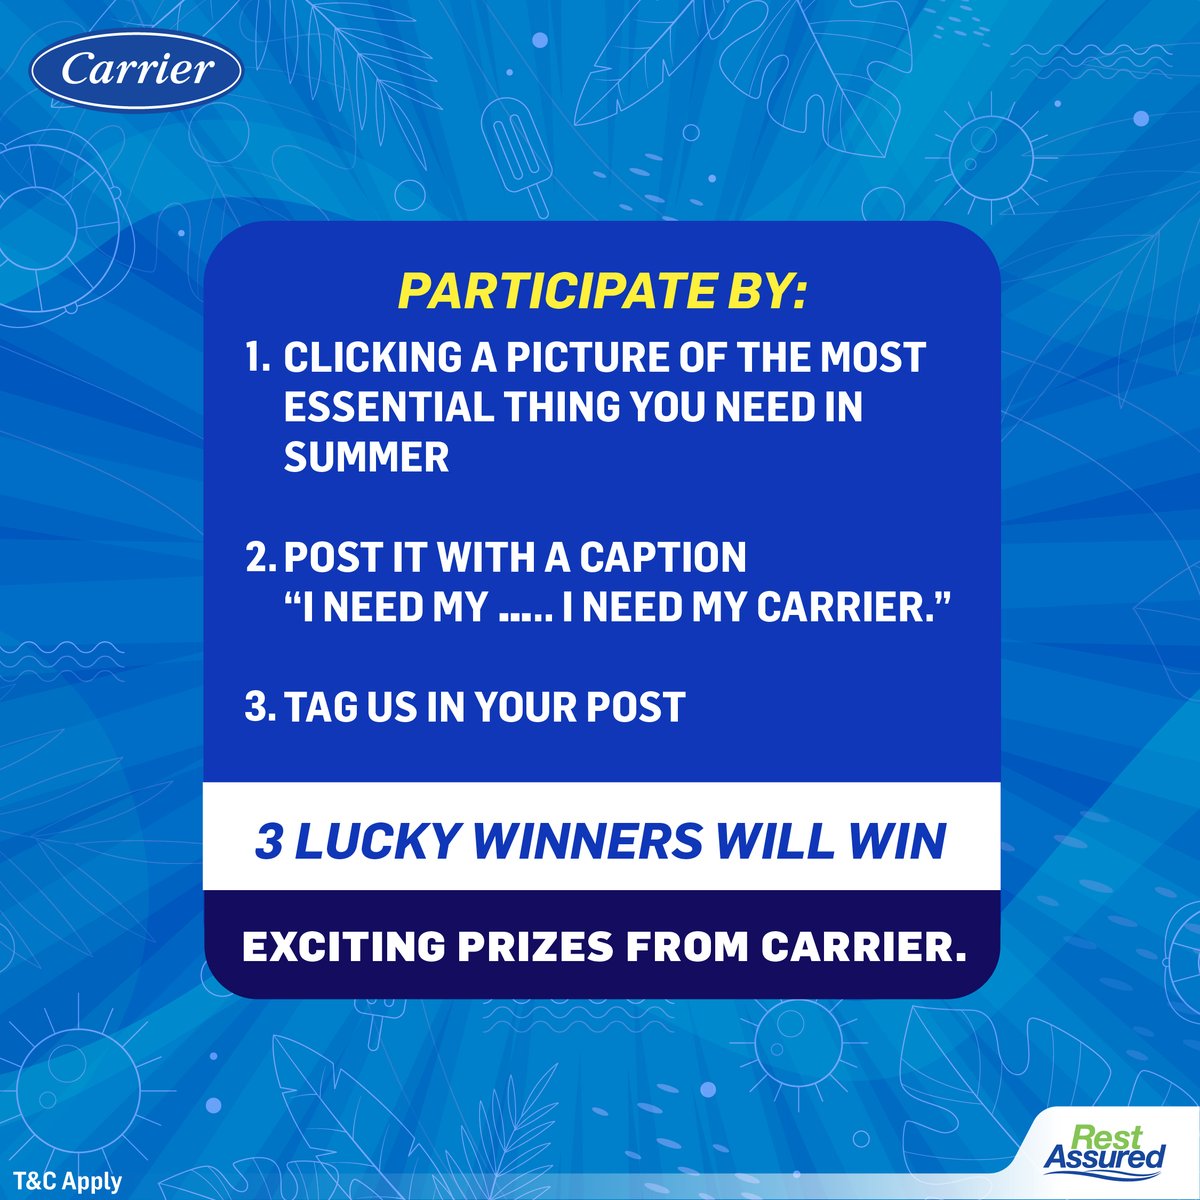 - Post it with a caption that reads “I need my <essential thing>. I need my Carrier.” - And finally tag us in your post You will get a chance to be among the 3 lucky winners who will win some of the coolest rewards from Carrier.